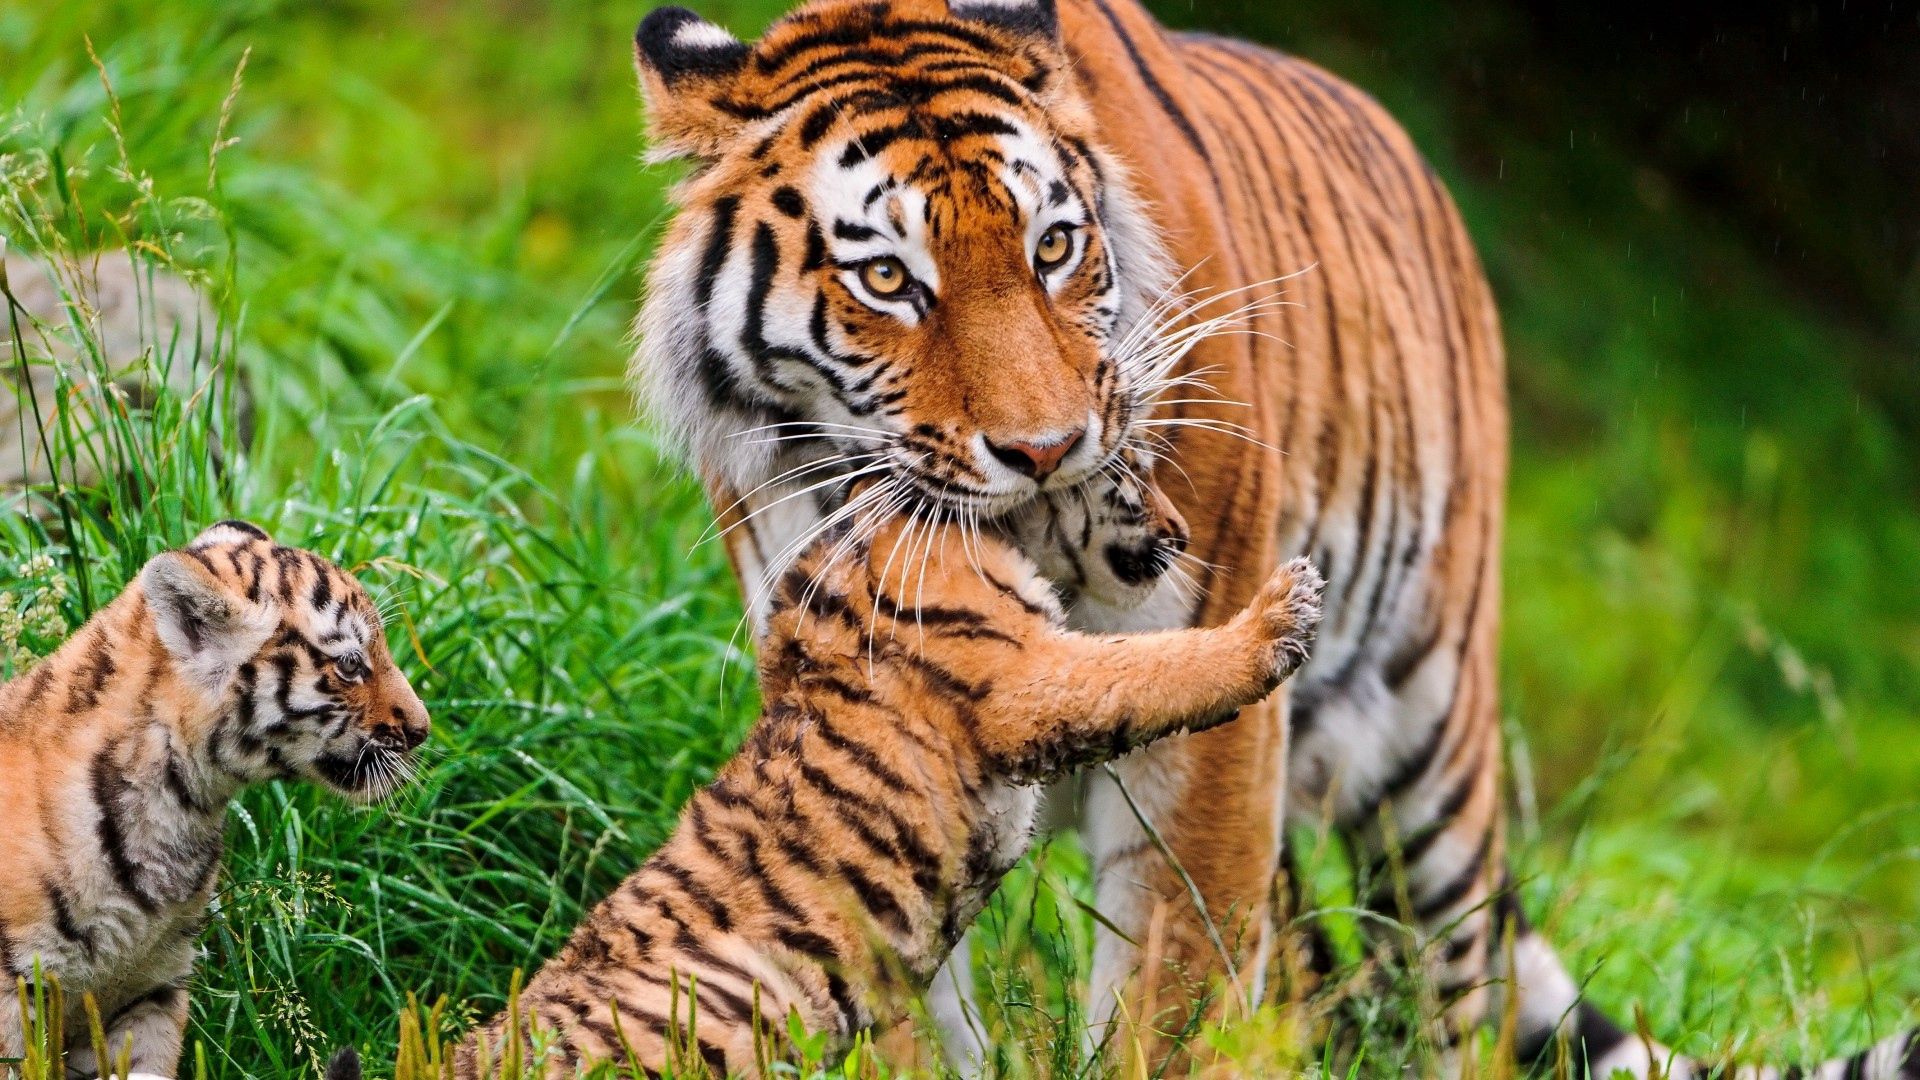 tiger, young, care, cubs, animals, grass